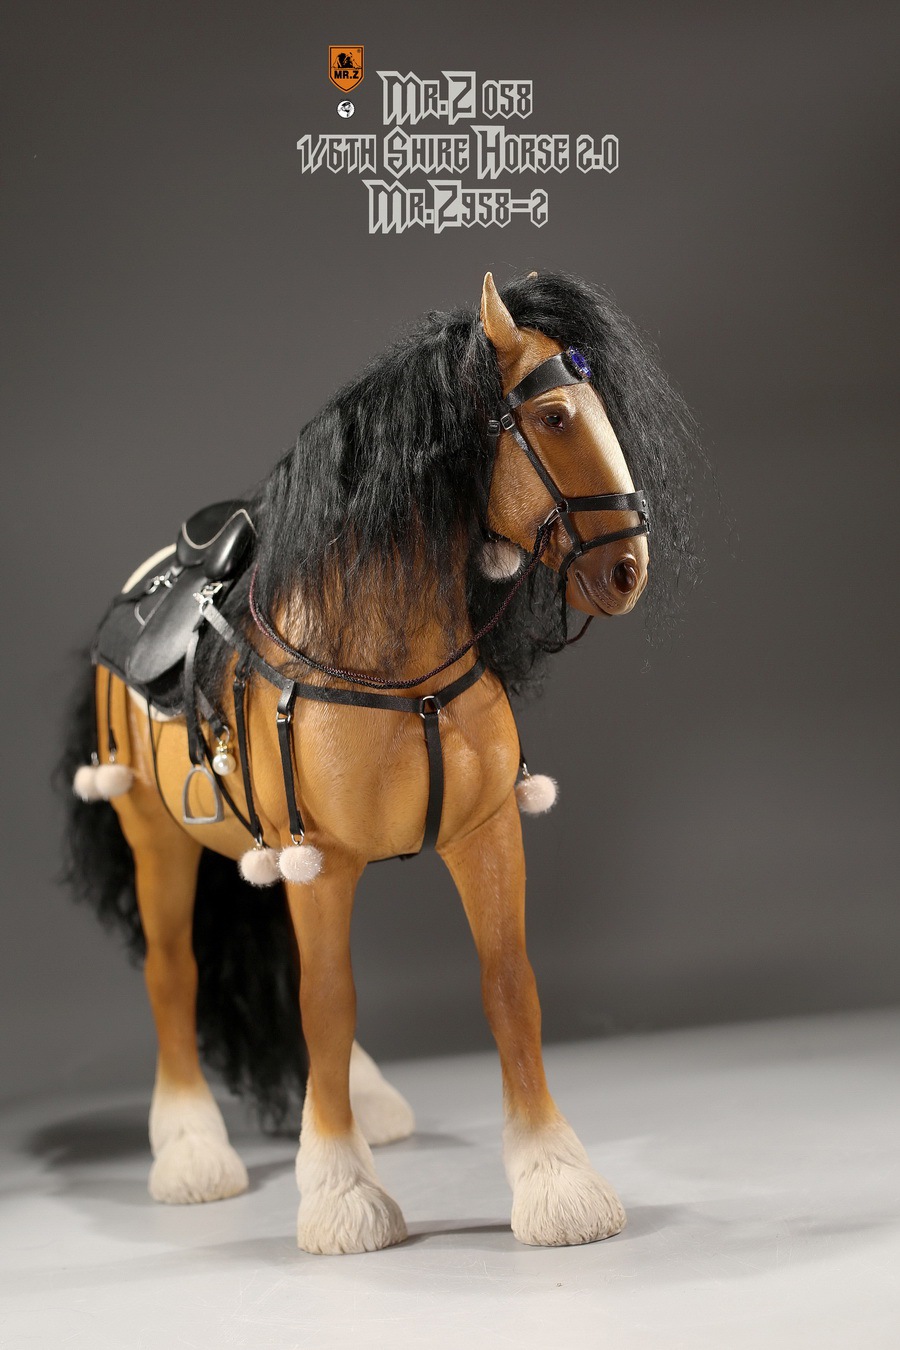 Mr - NEW PRODUCT: MR. Z: 58th round-Shire Horse 2.0 version full set of 5 colors  08575112